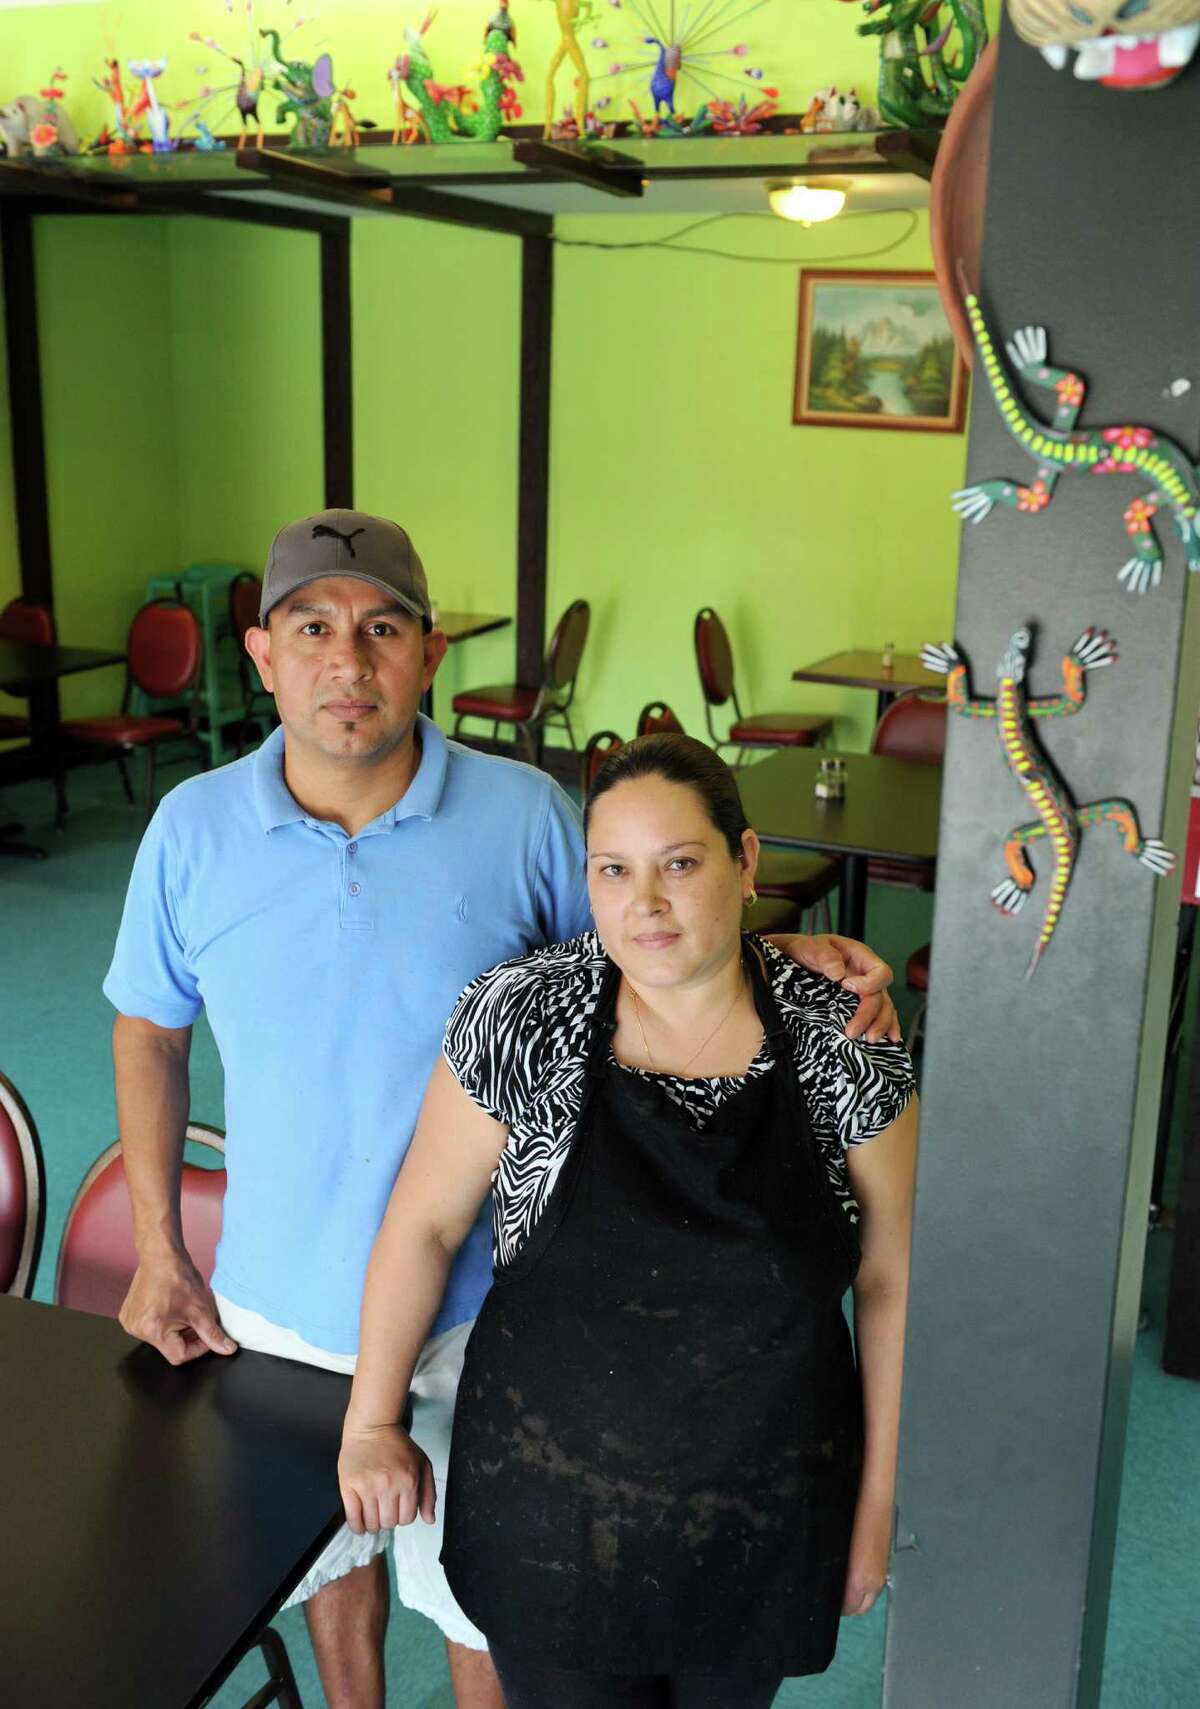 Everardo Sosa-Mendoza and his wife, Maria Sosa owners of La Mexicana restaurant and grocery store on Tuesday Oct. 1, 2013 in Schenectady, N.Y. (Michael P. Farrell/Times Union)